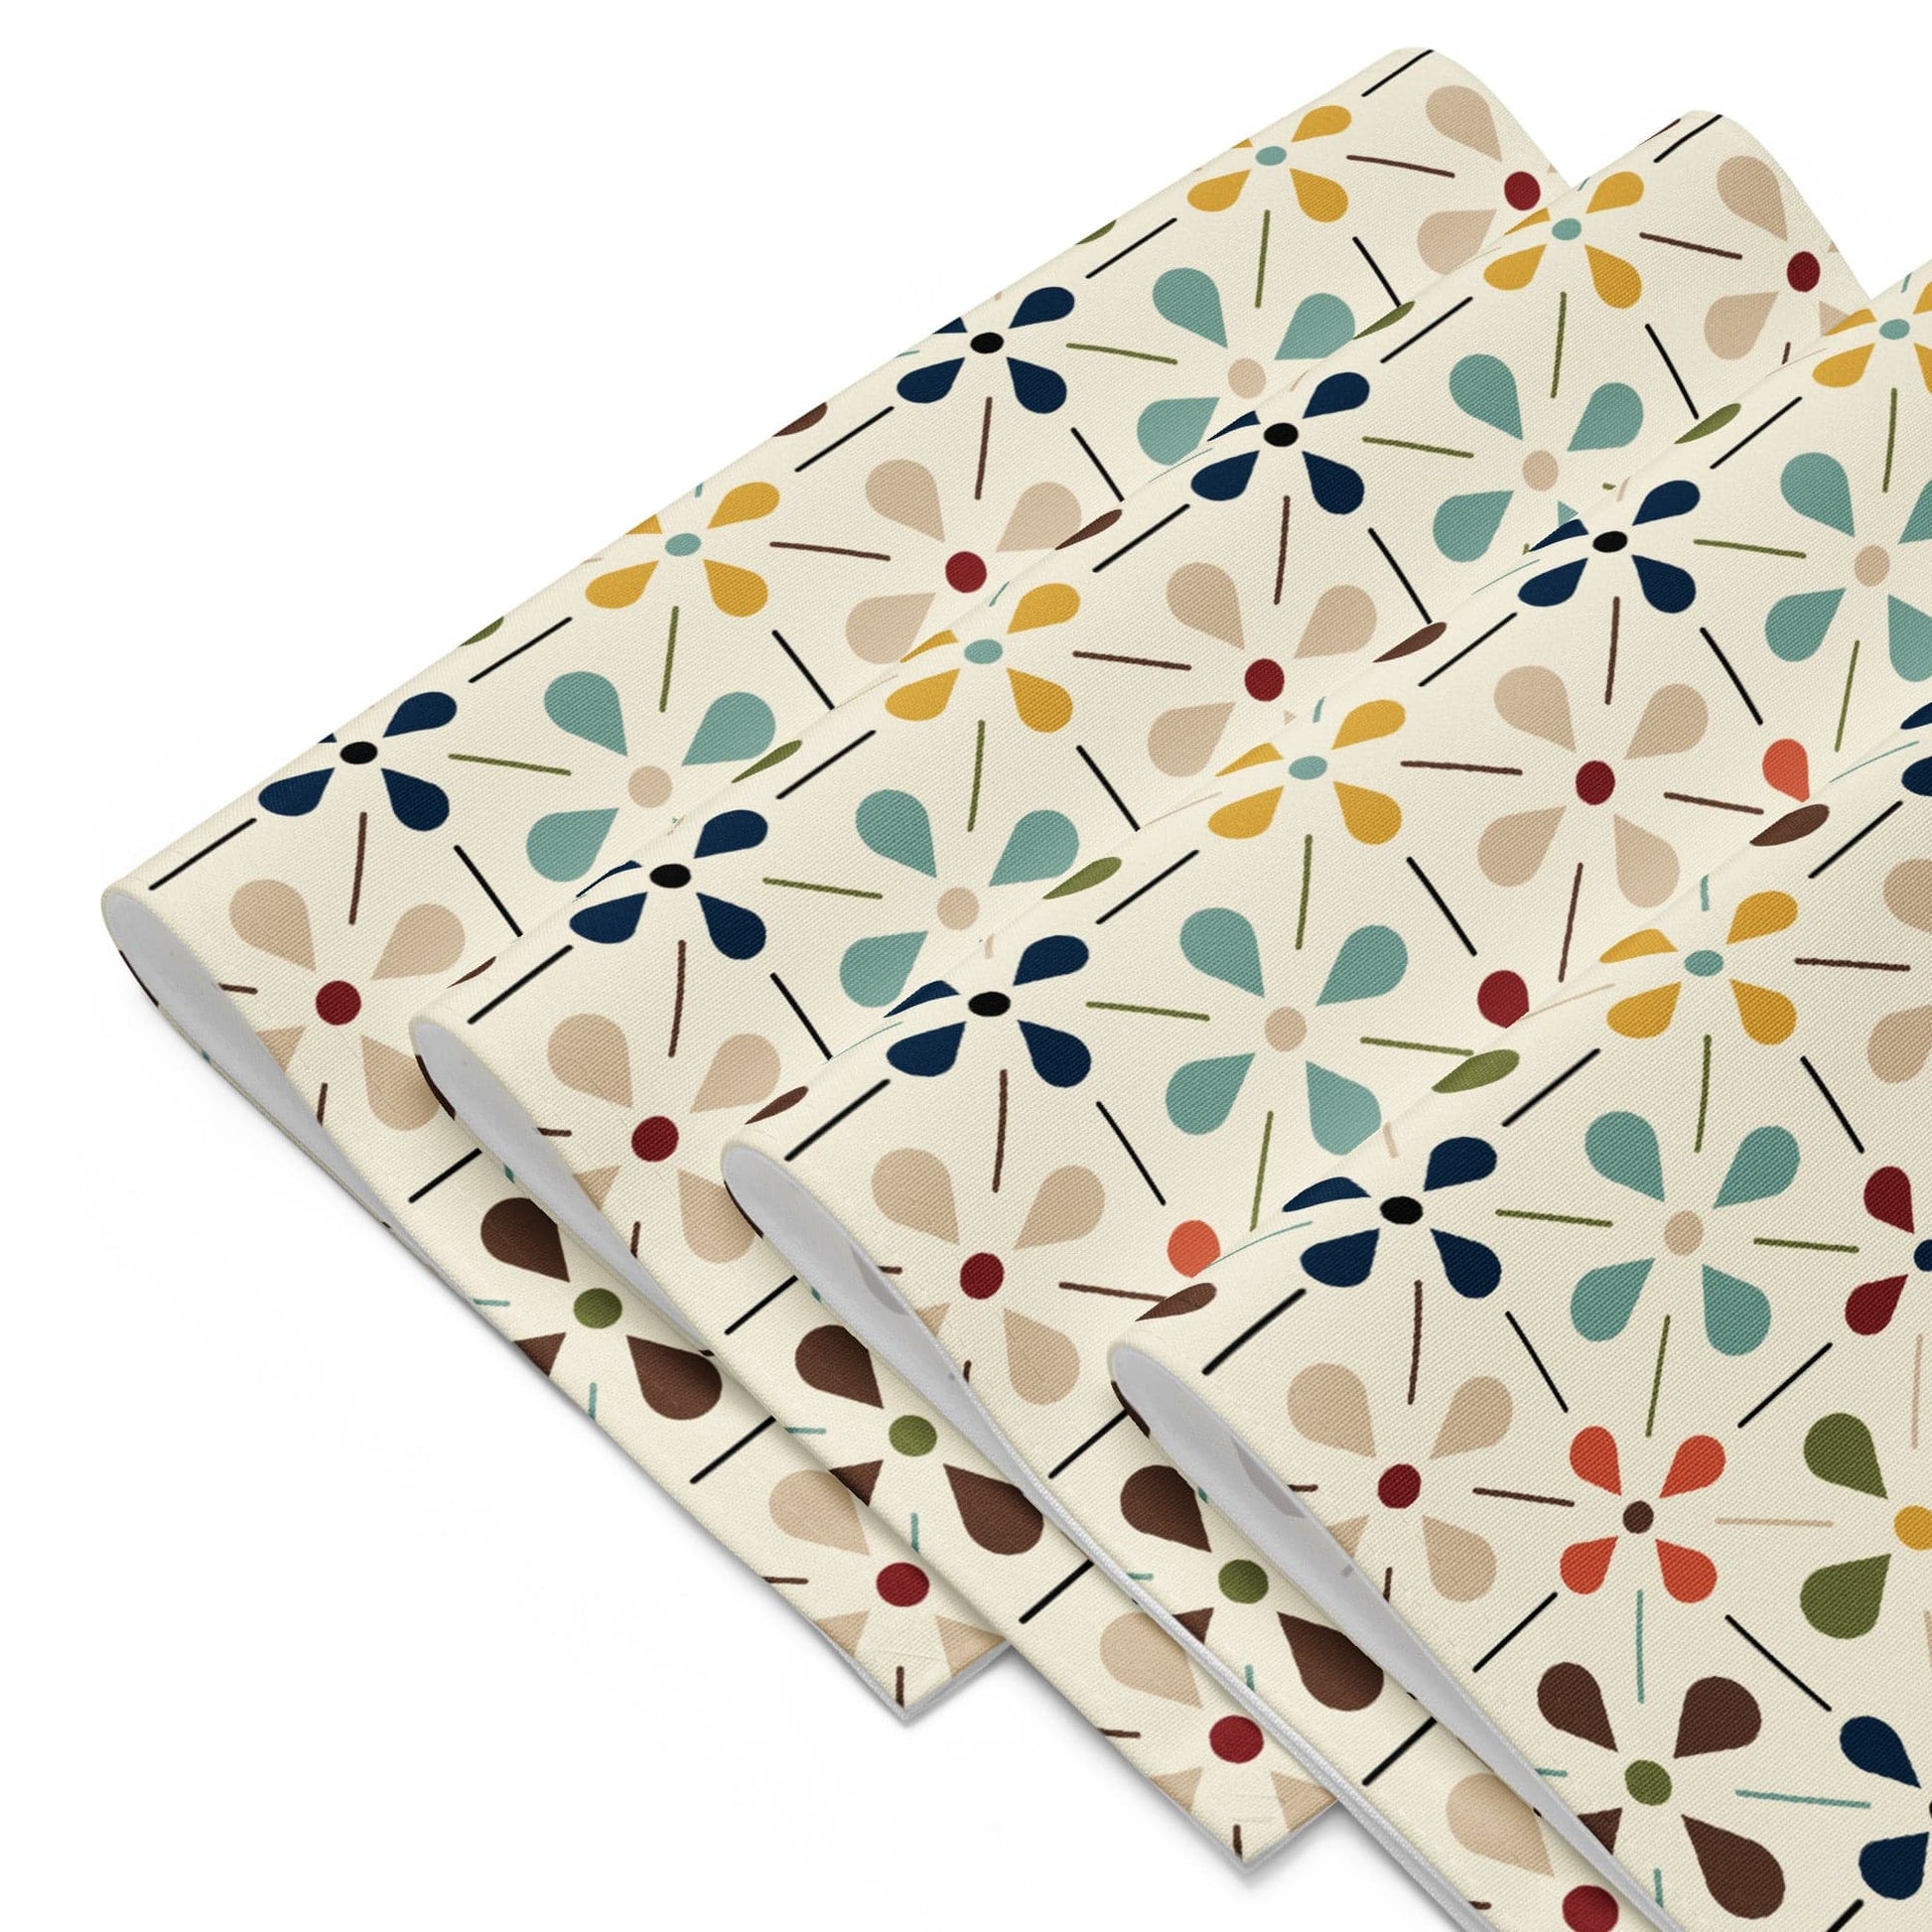 Kate McEnroe New York Set of 4 Mid Century Modern Retro Floral Placemats, 50s MCM Cream, Teal, Mustard, and Rust Table Mats Placemats 7869988_17484